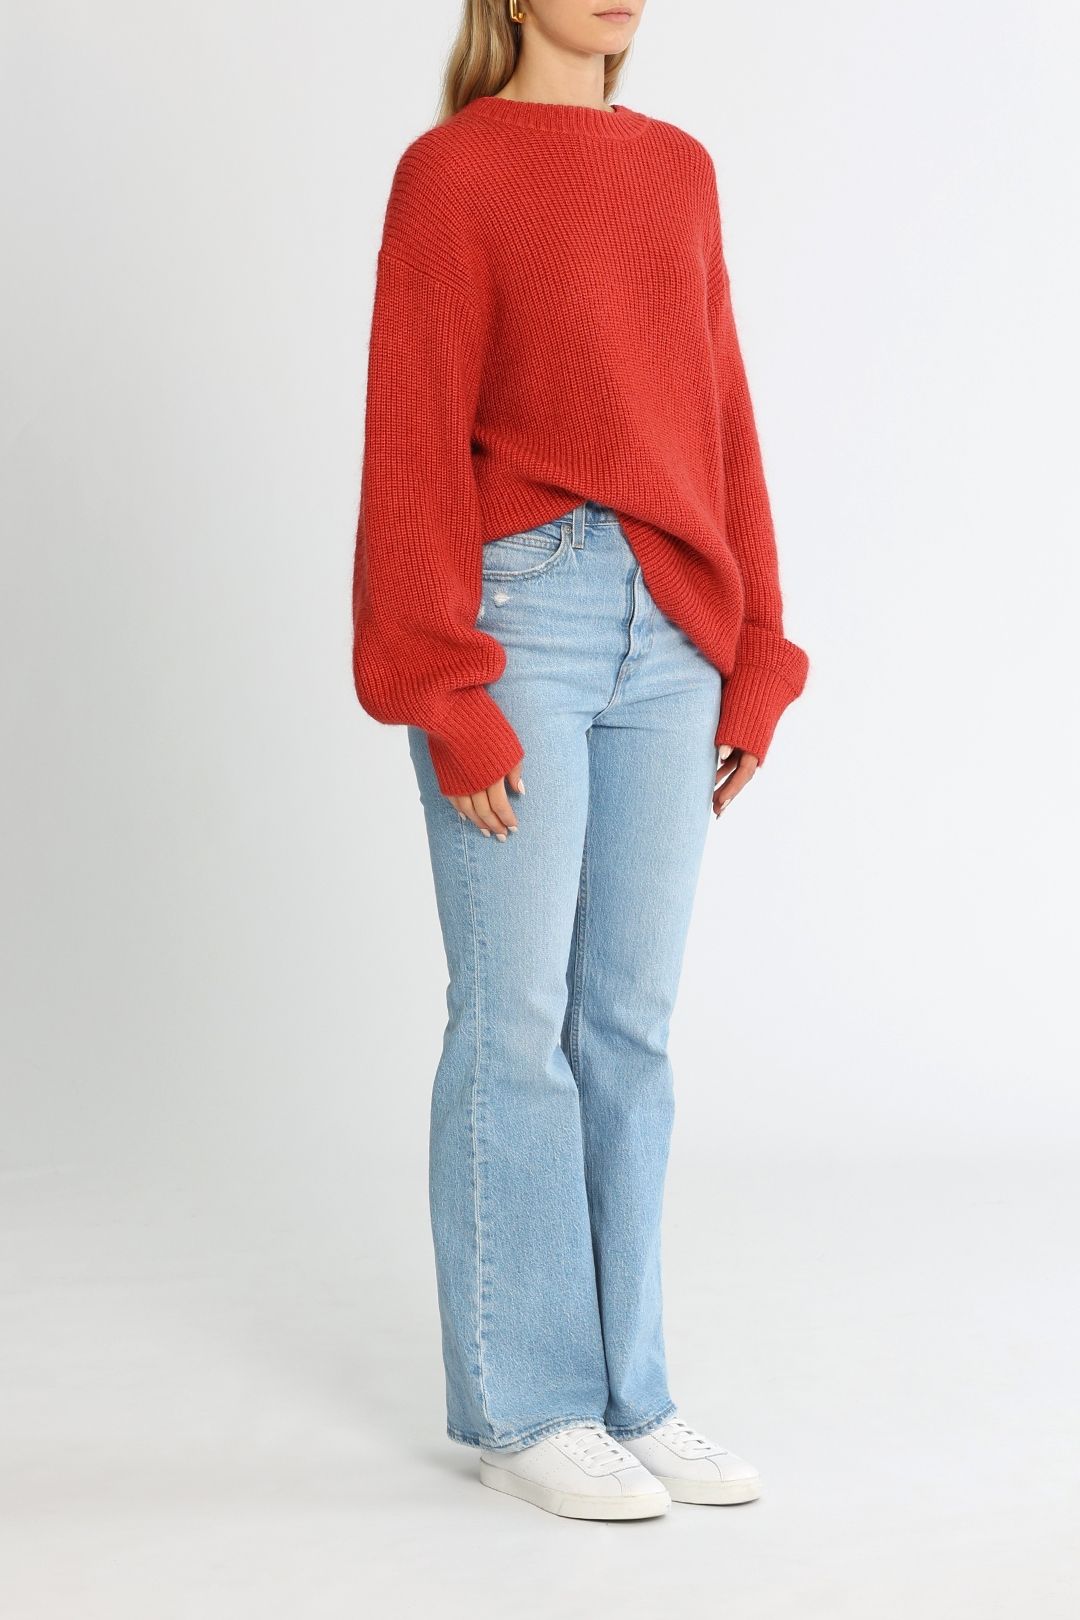 Camilla and Marc Nichols Knit Sweater Watermelon Long Sleeves